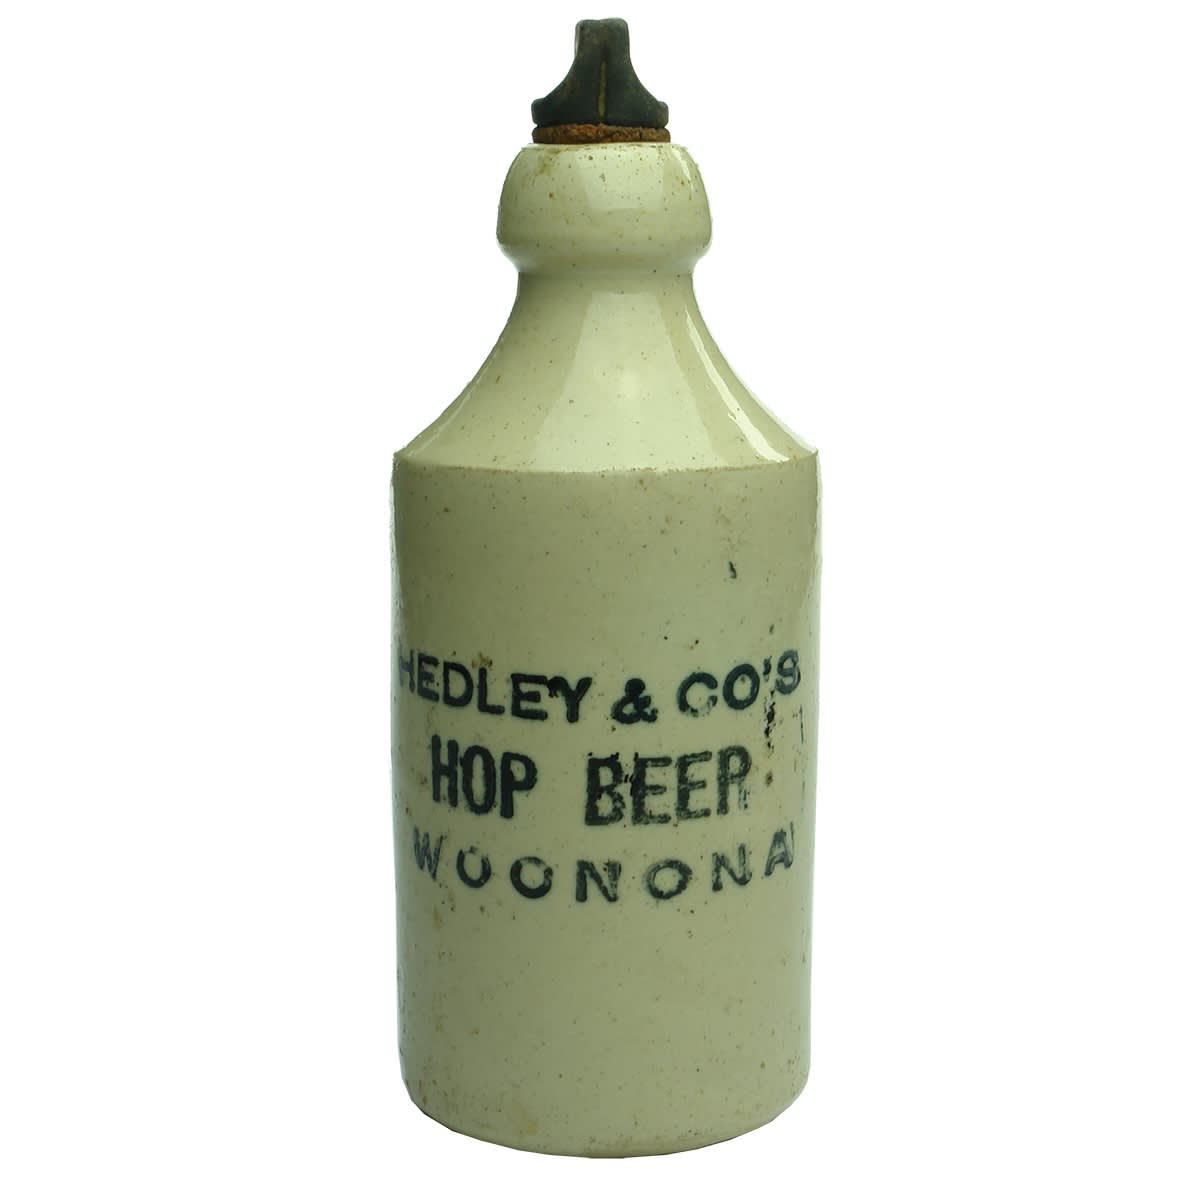 Ginger Beer. Hedley & Co's Hop Beer Woonona. Internal Thread. (New South Wales)